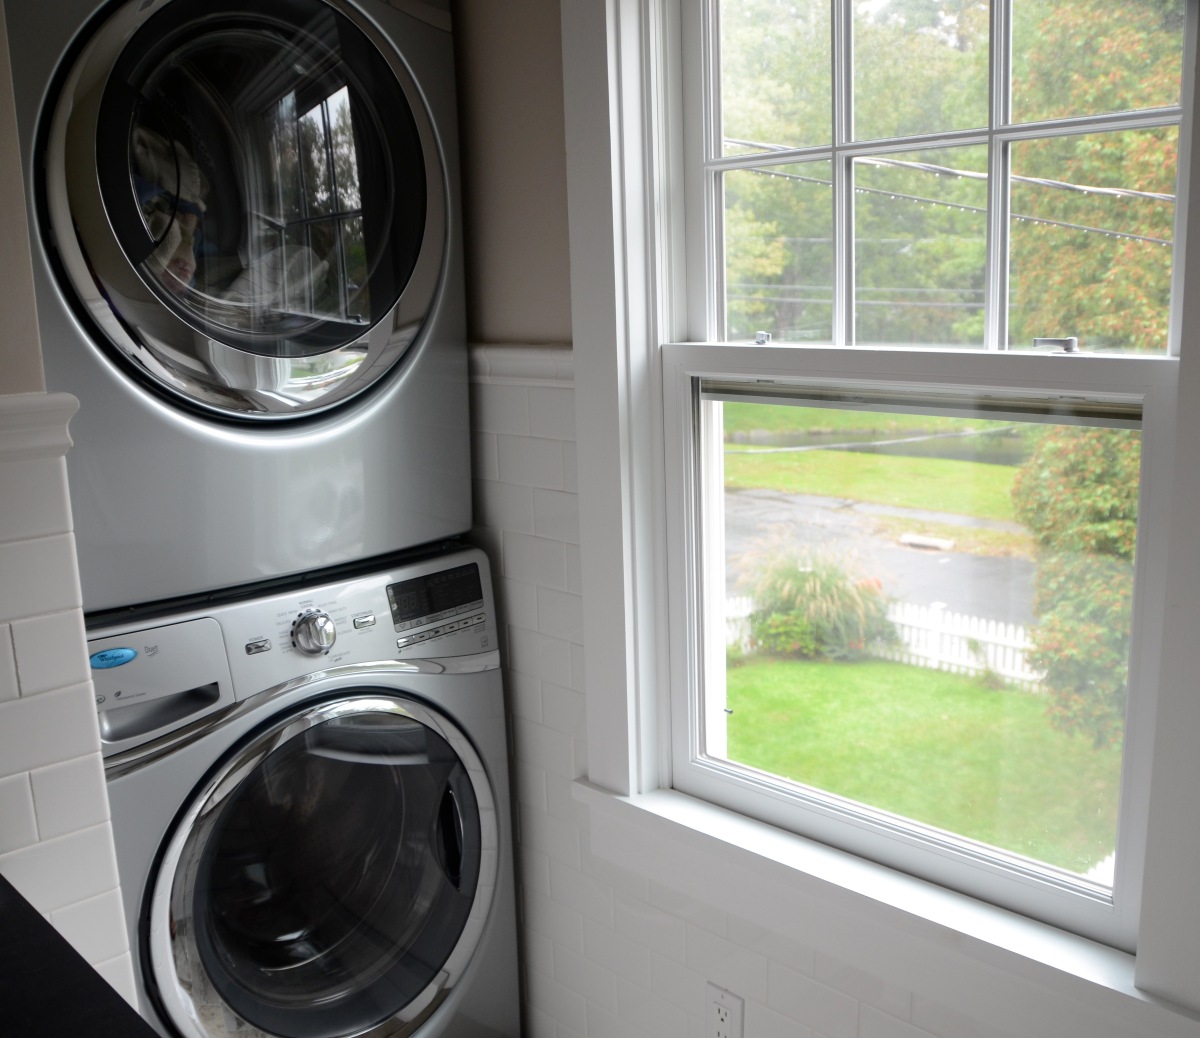 Darien LEED Home - Laundry Room with stacked energy efficient washer dryer